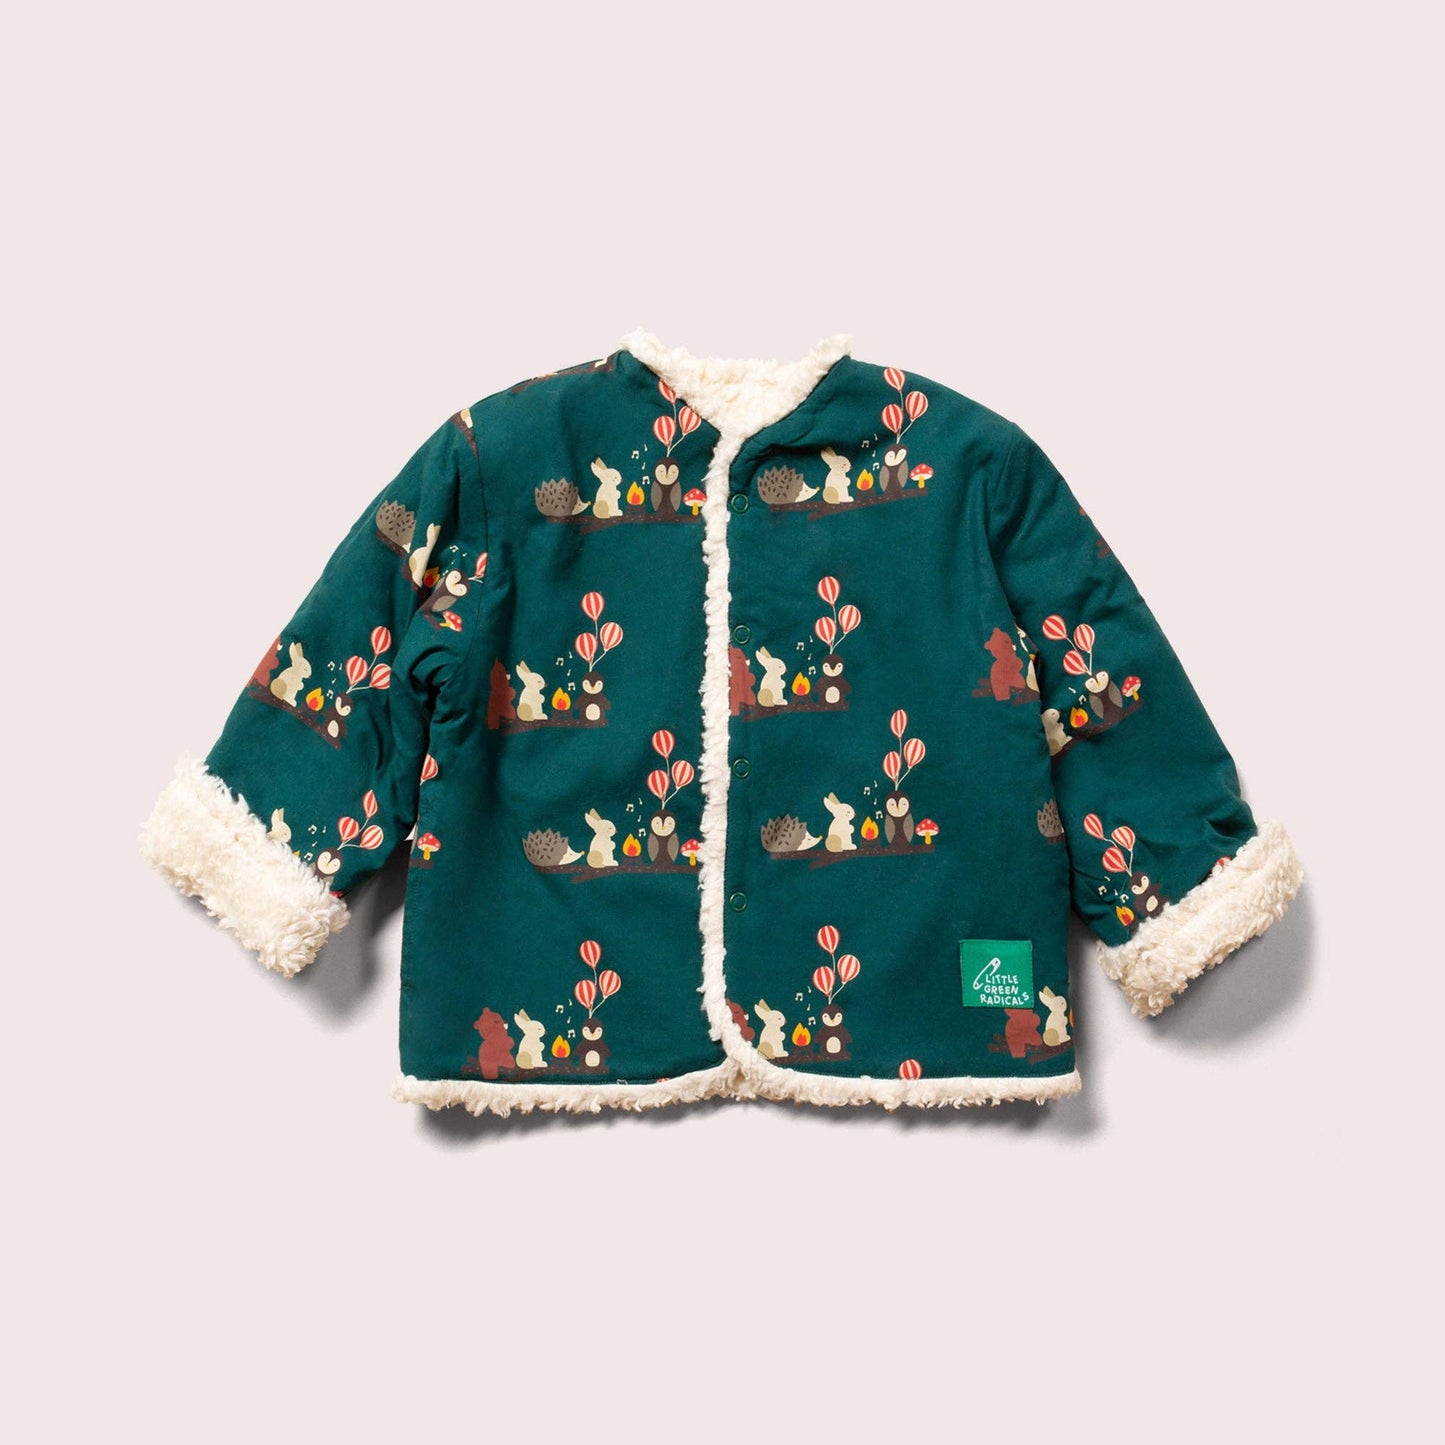 Jacket - Around the Campfire Reversible